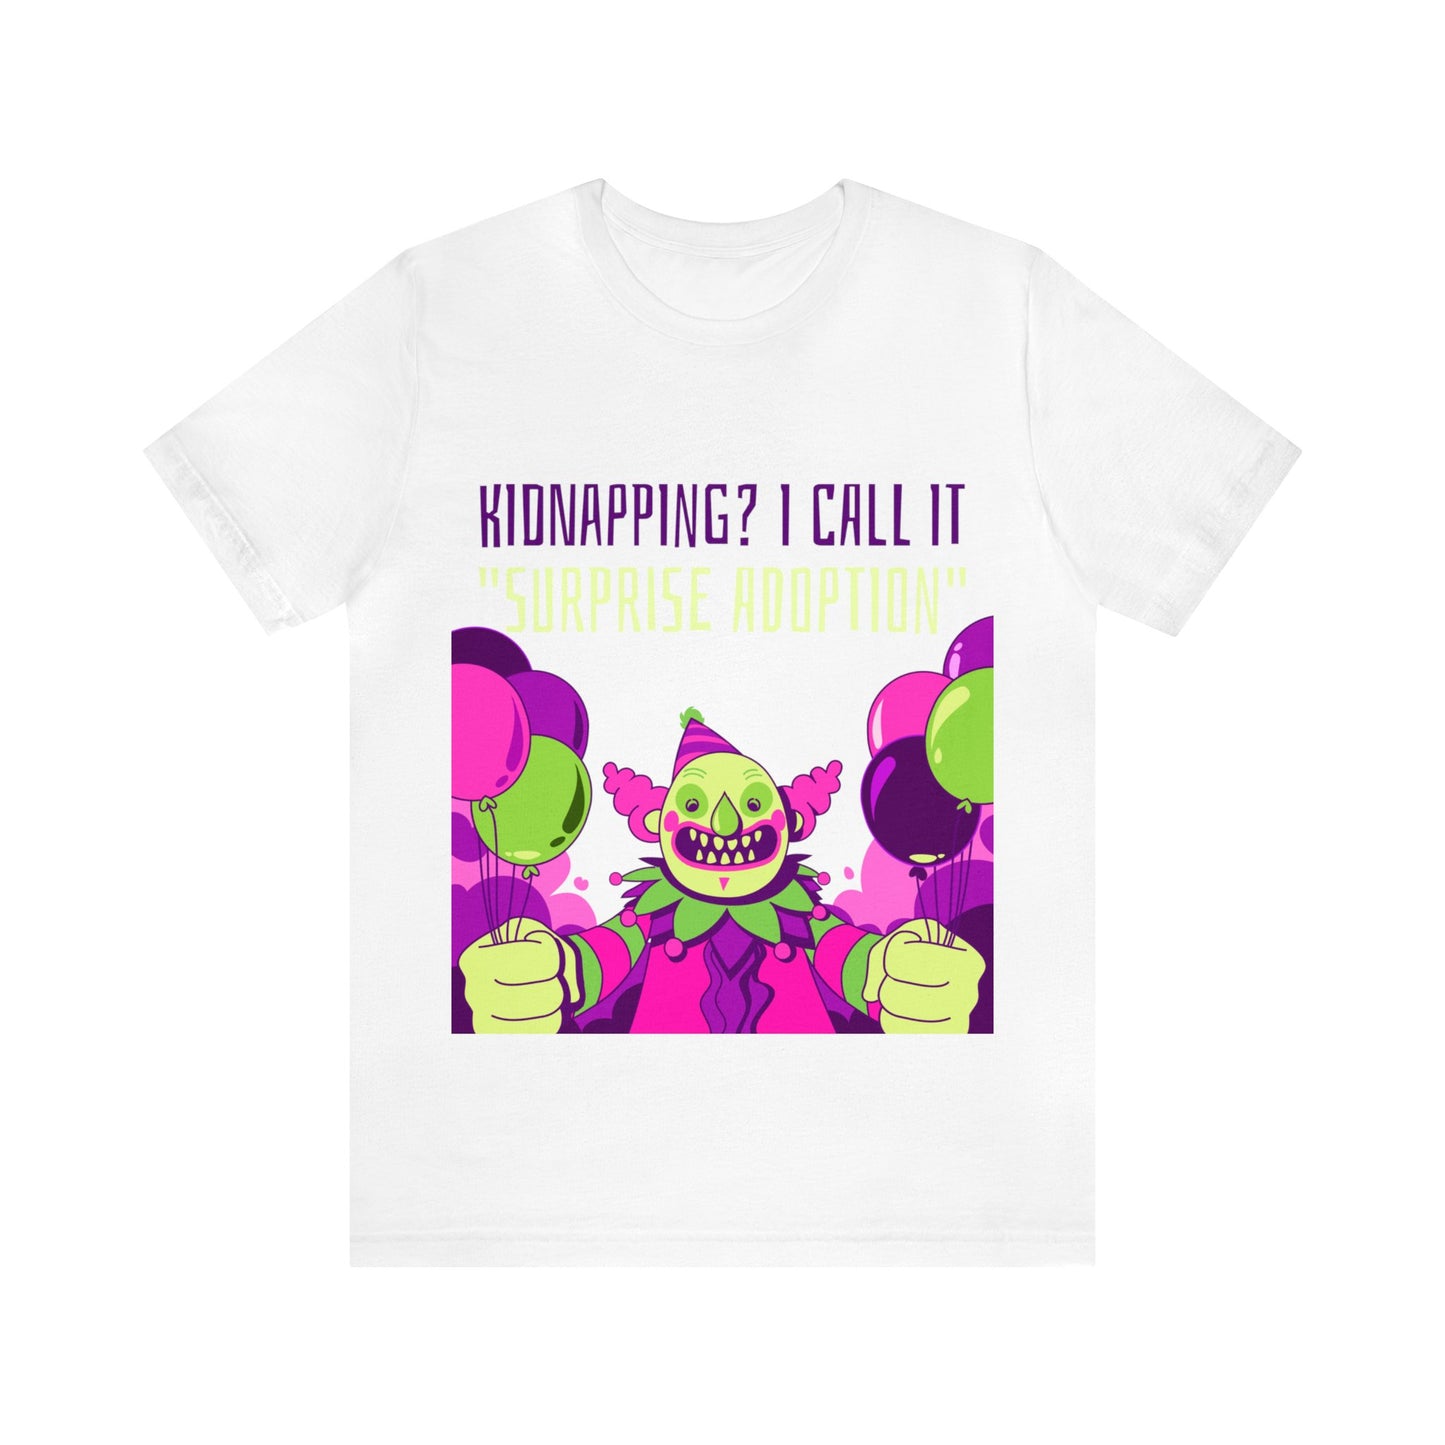 Kidnapping I Call It Surprise Adoption - Unisex T-Shirt